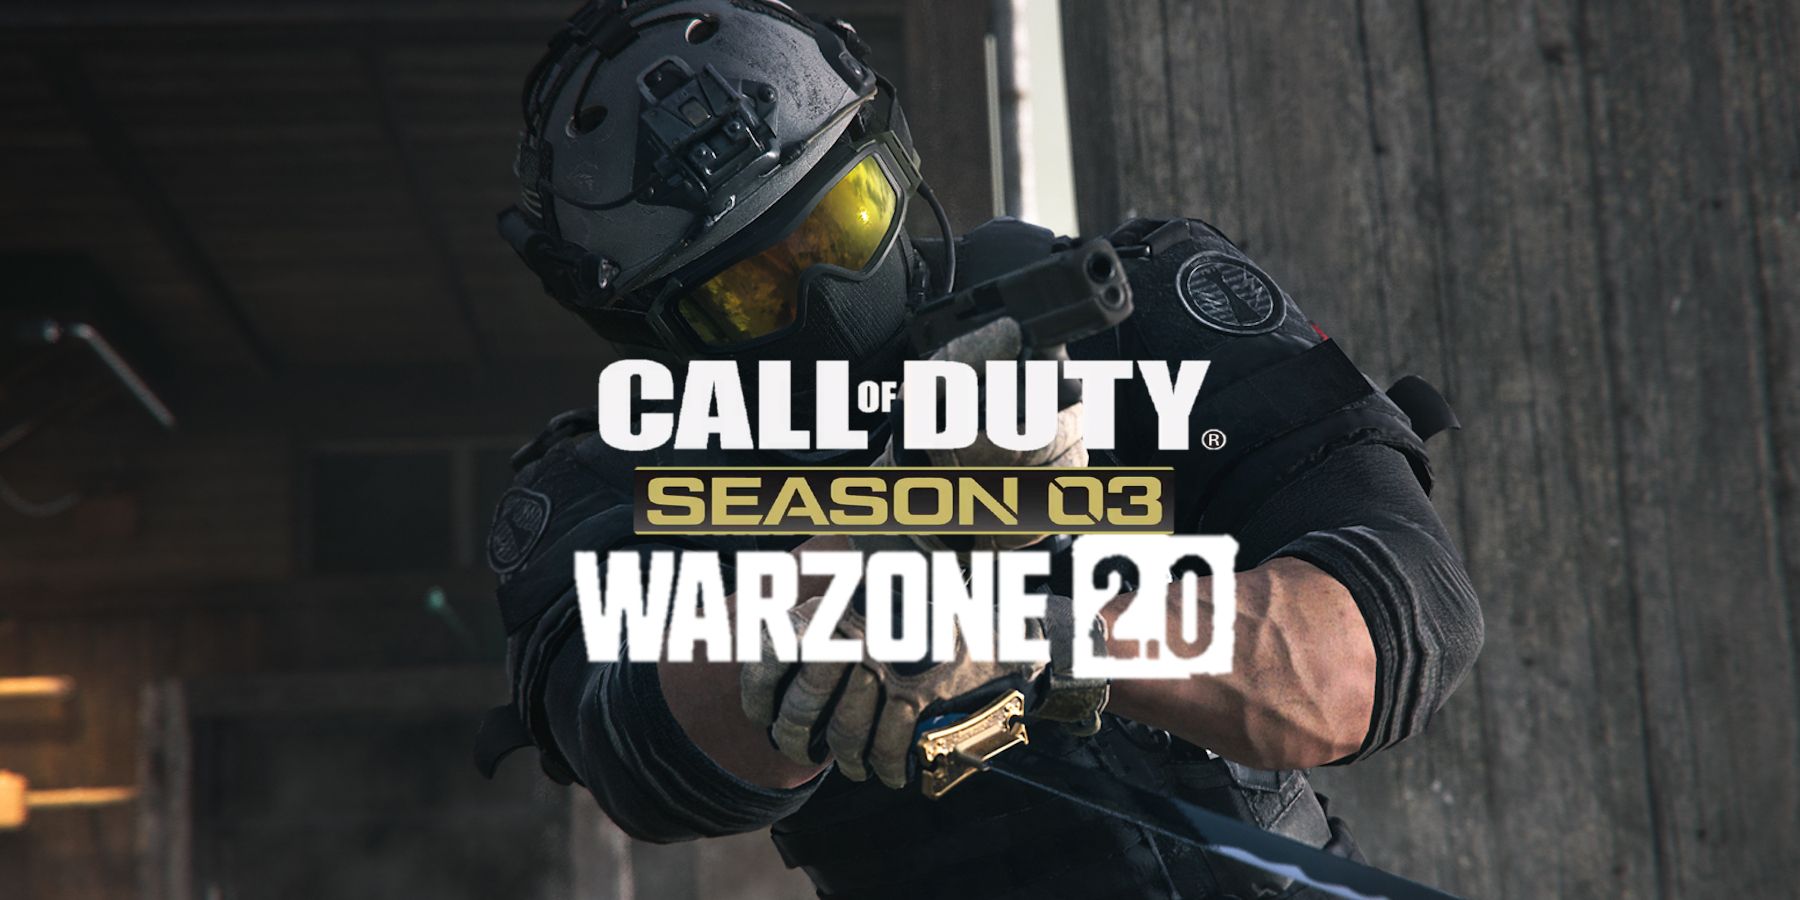 Warzone 2 Season 3 - Call of Duty: Warzone 2.0 Guide - IGN